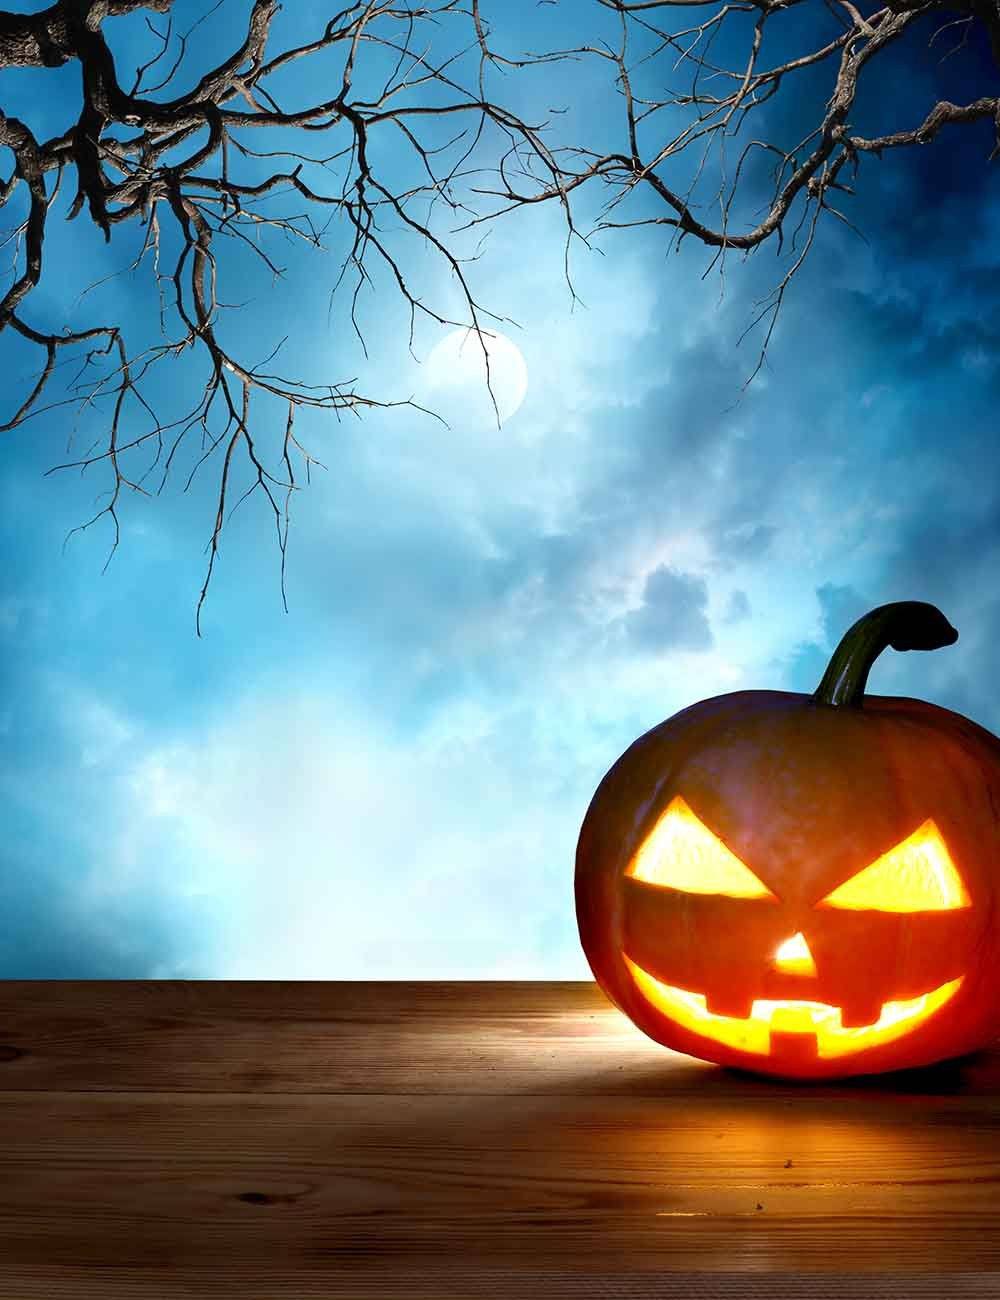 Halloween Pumpkin On Wood Floor With Clundy Night Backdrop For Photo Shopbackdrop